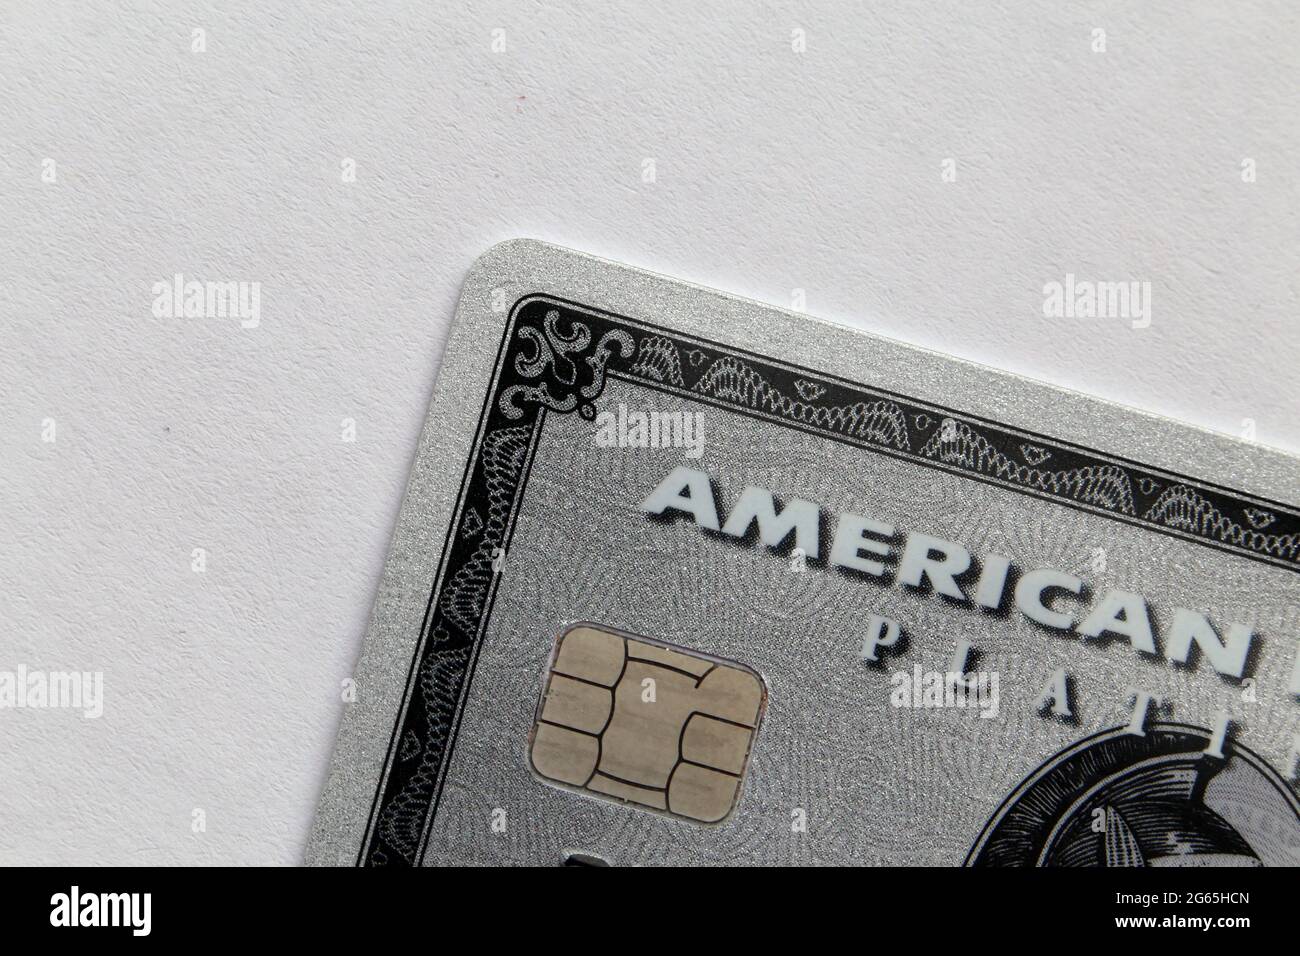 American Express Platinum (Amex Platinum) card in a closeup image - this is the old Amex Platinum made of plastic. April 2020, Espoo, Finland. Stock Photo